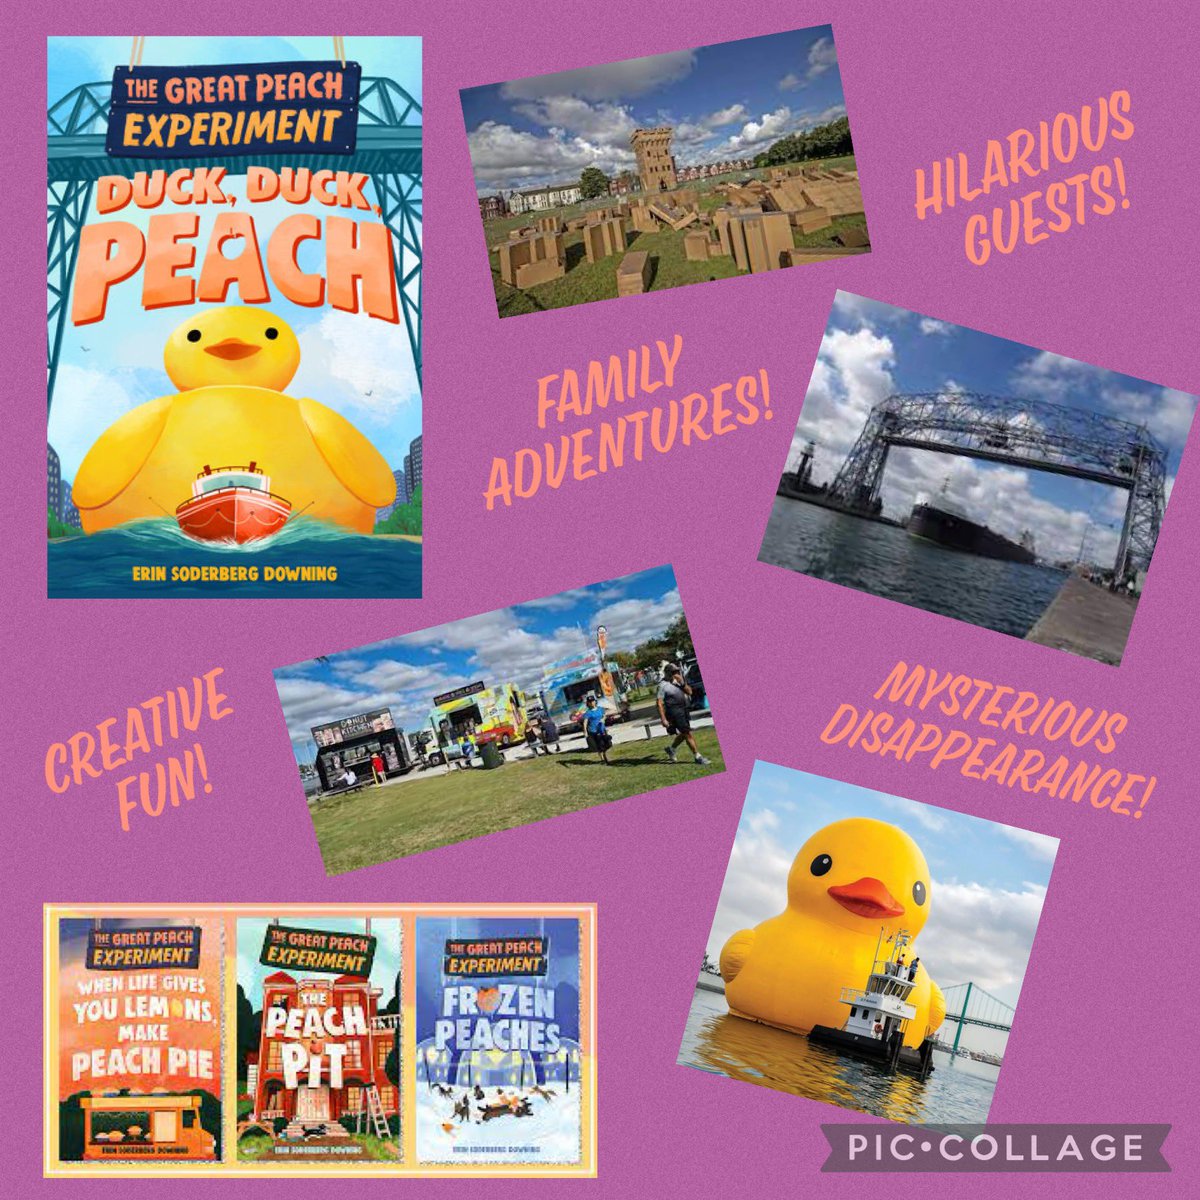 Happy book-birthday to the final installment in the adventures of the Peach family! What a romp it has been with them and such a fun way to end the series. Get @erindowning DUCK, DUCK PEACH now! @PixelandInkBks #BookAllies